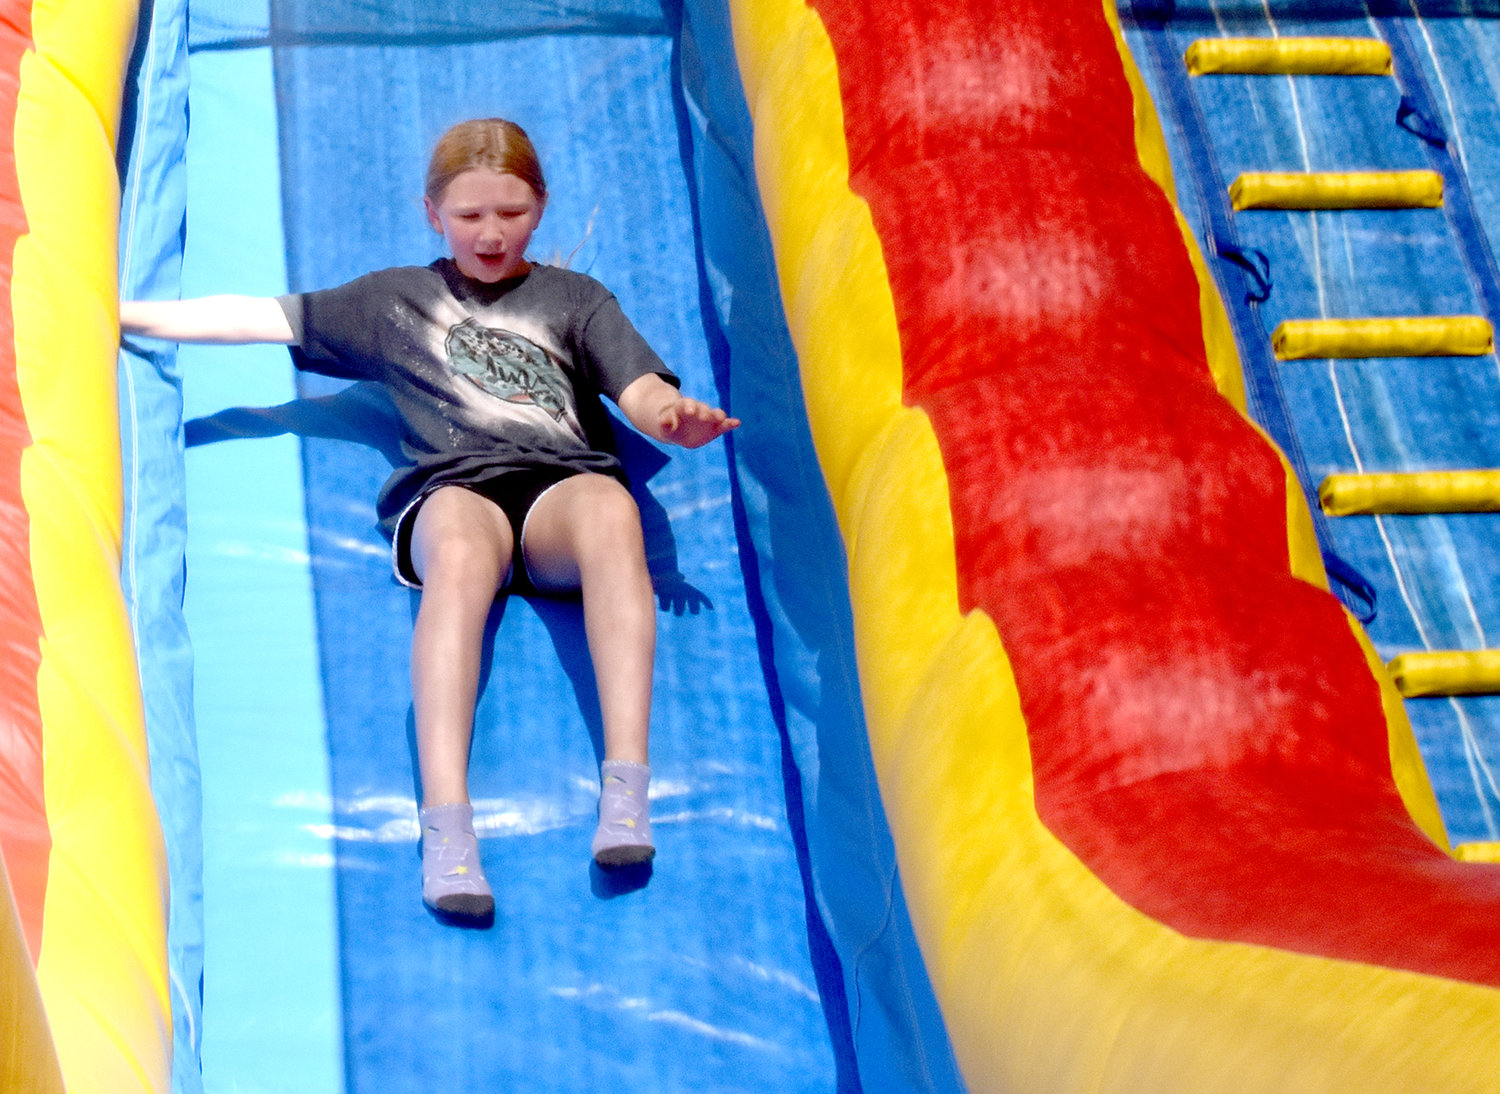 Katherine Good took a trip down an inflatable slide.